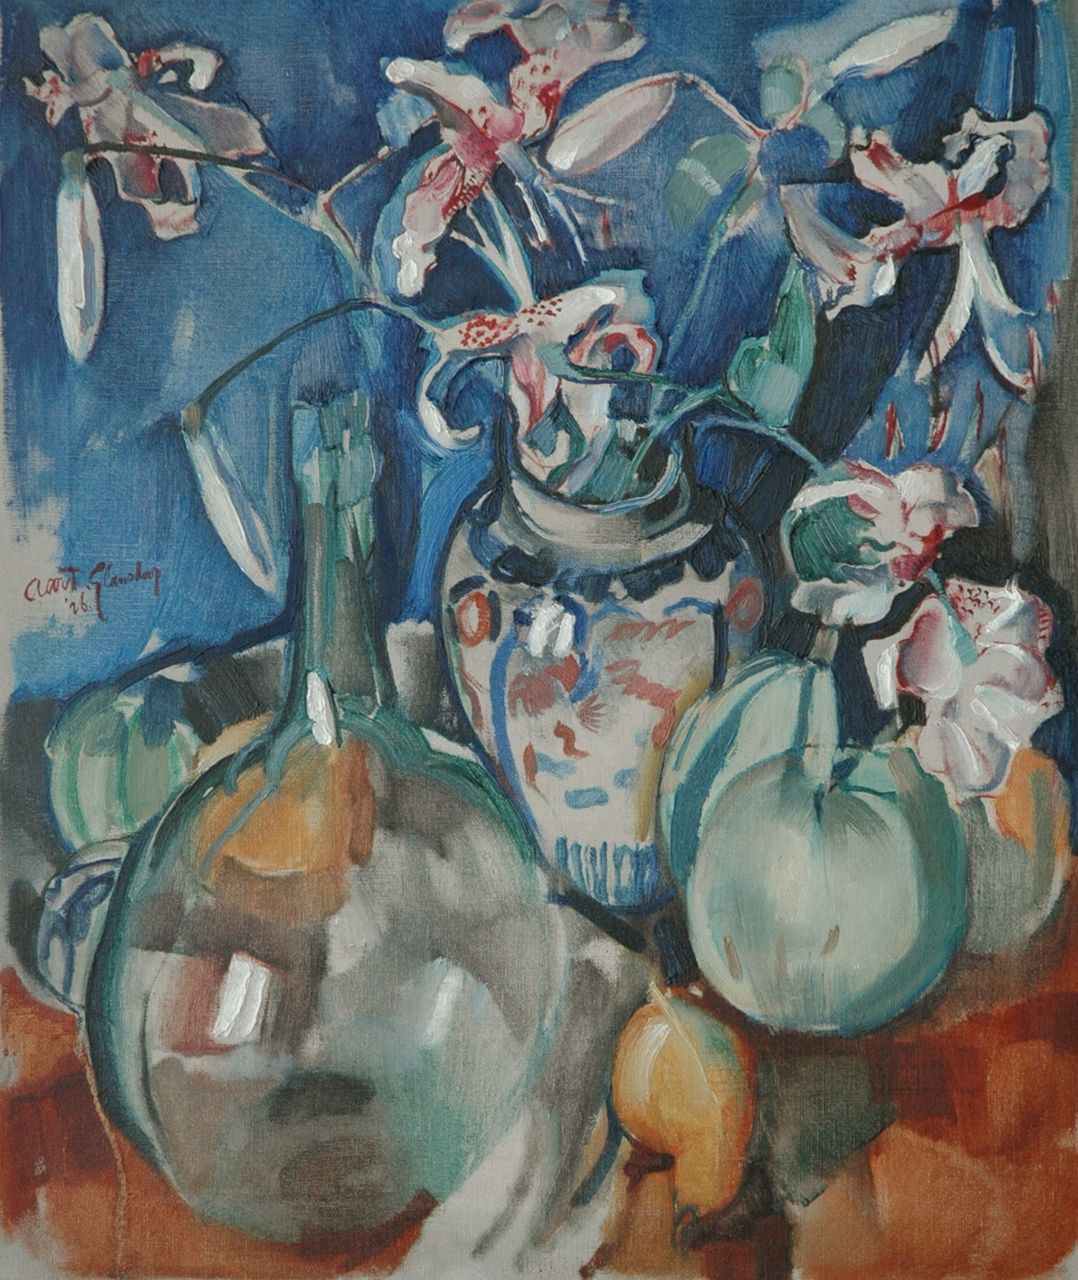 Glansdorp A.  | Aart Glansdorp | Paintings offered for sale | Orchids in an oriental vase, oil on canvas 65.8 x 55.6 cm, signed c.l. and dated '26